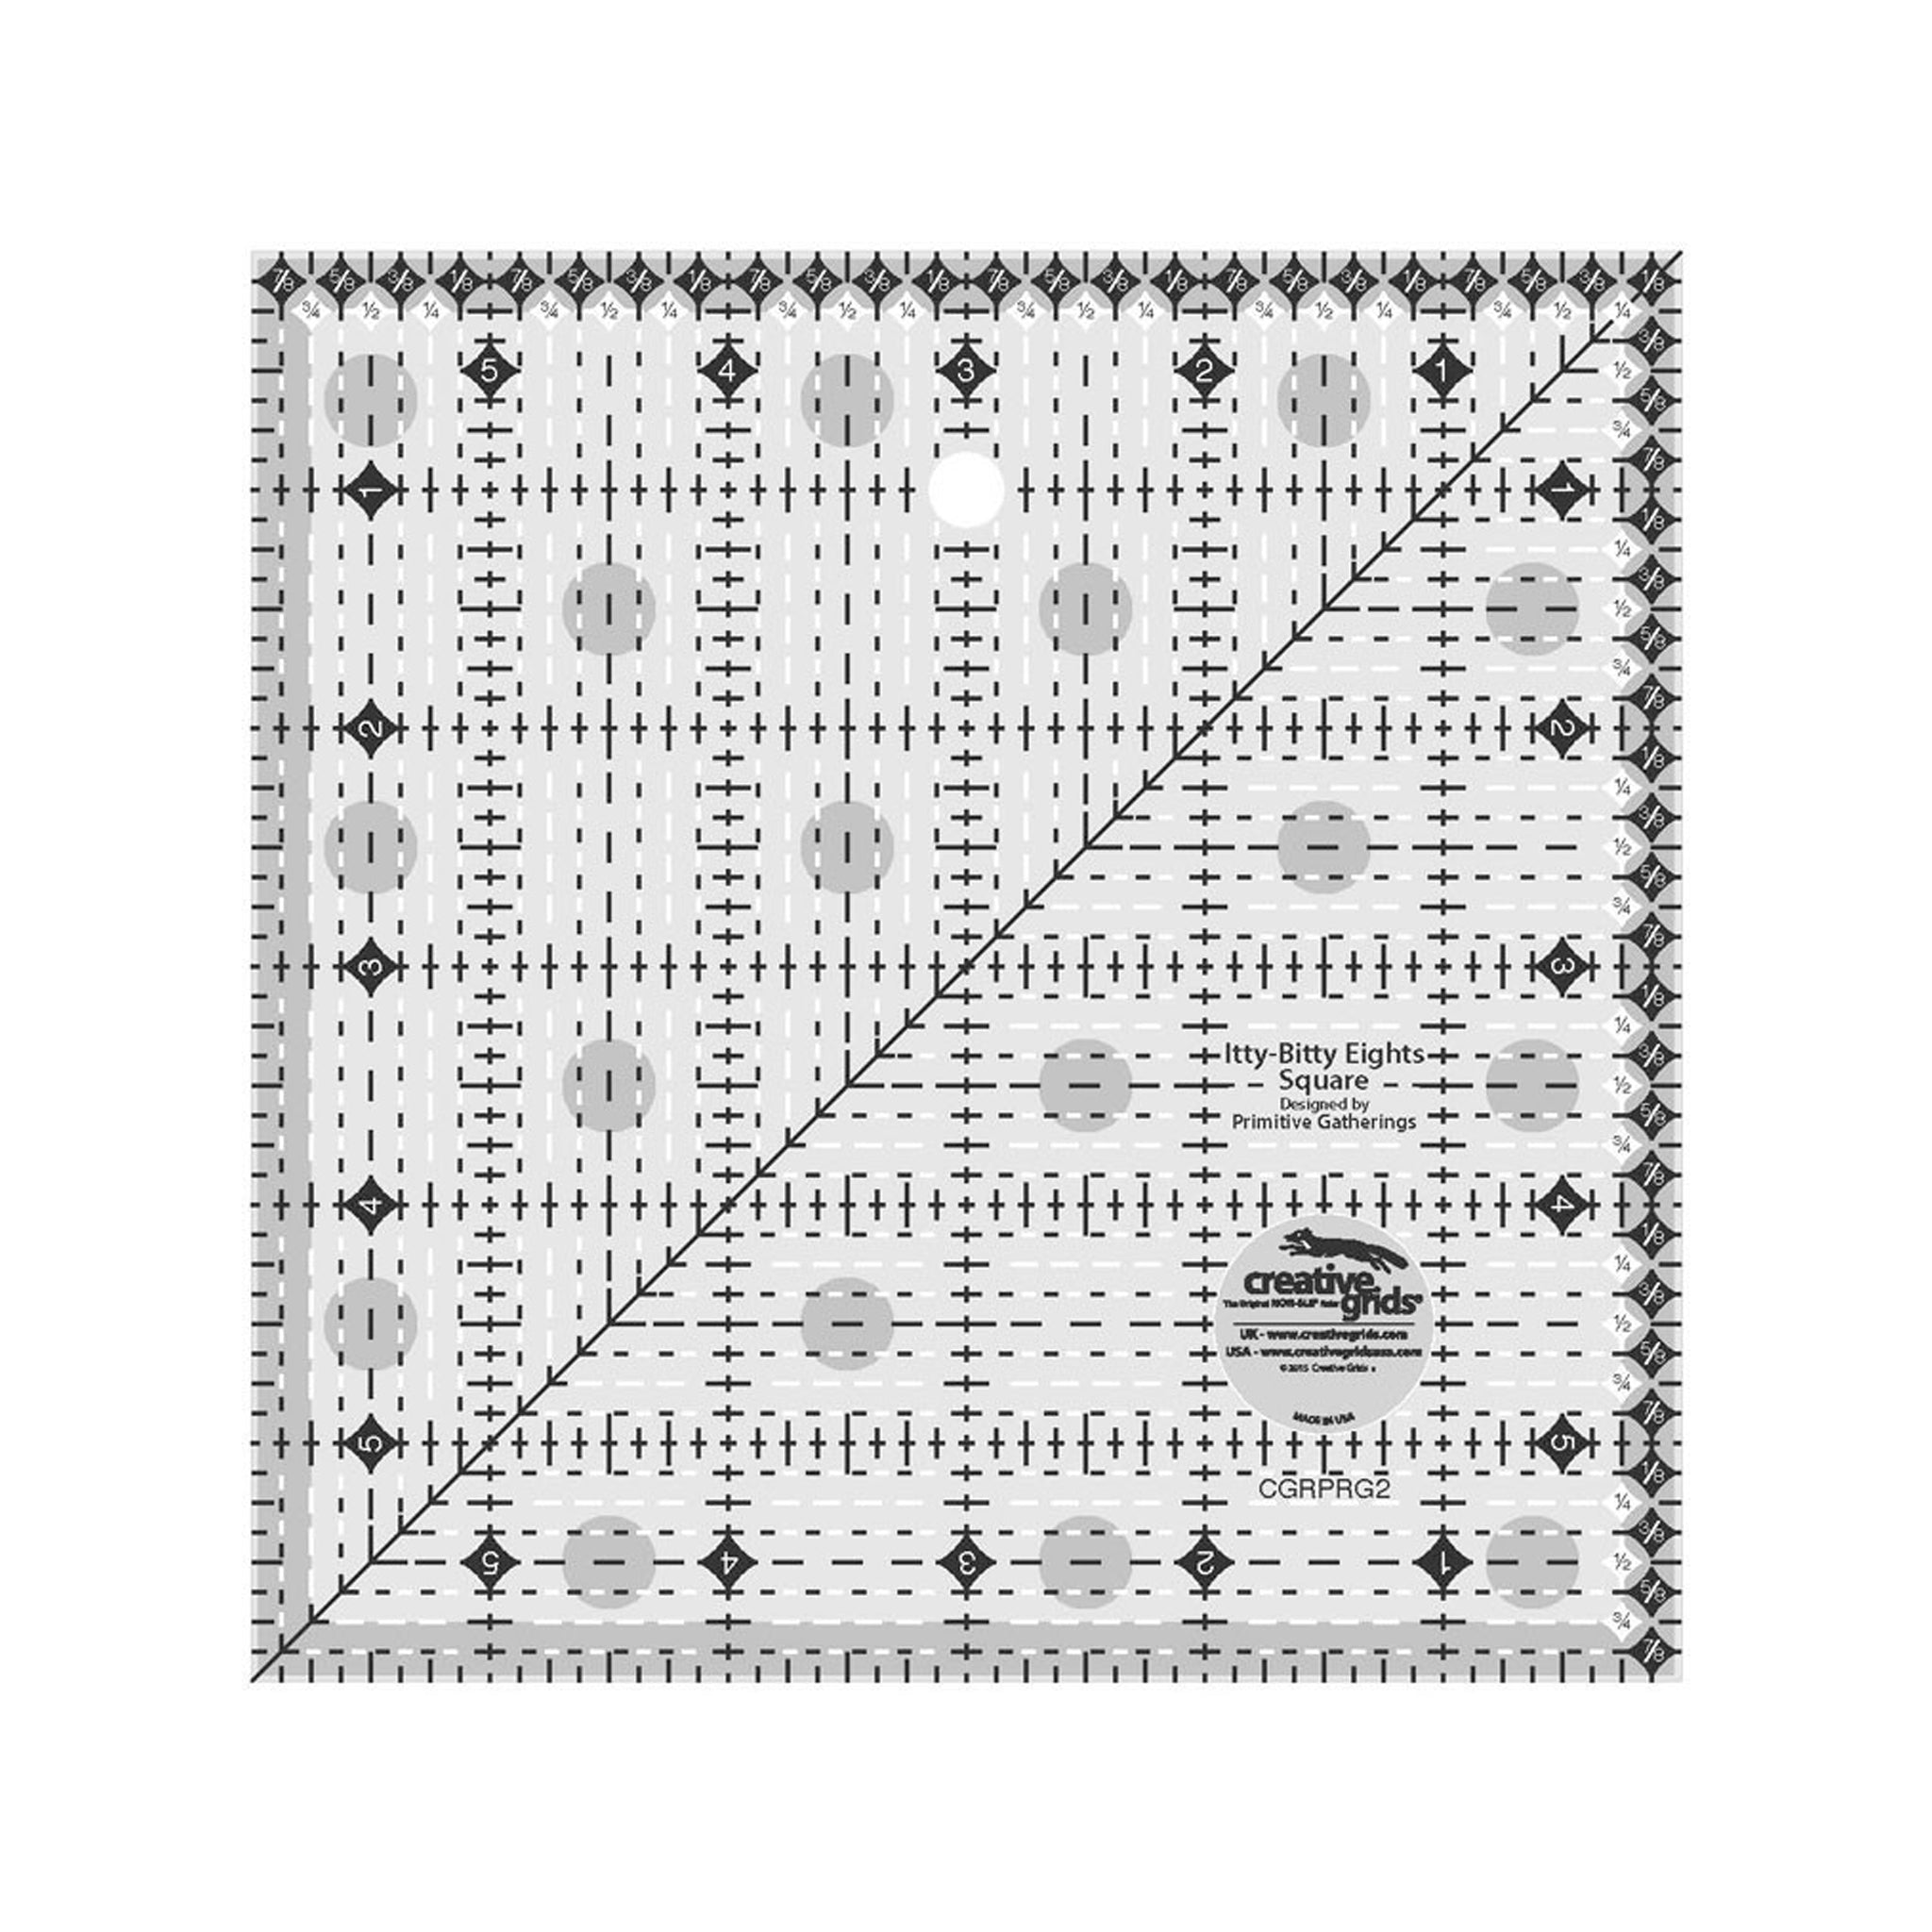 Creative Grids Itty-Bitty Eights Square 6-Inch x 6-Inch Quilt Ruler (CGRPRG2)